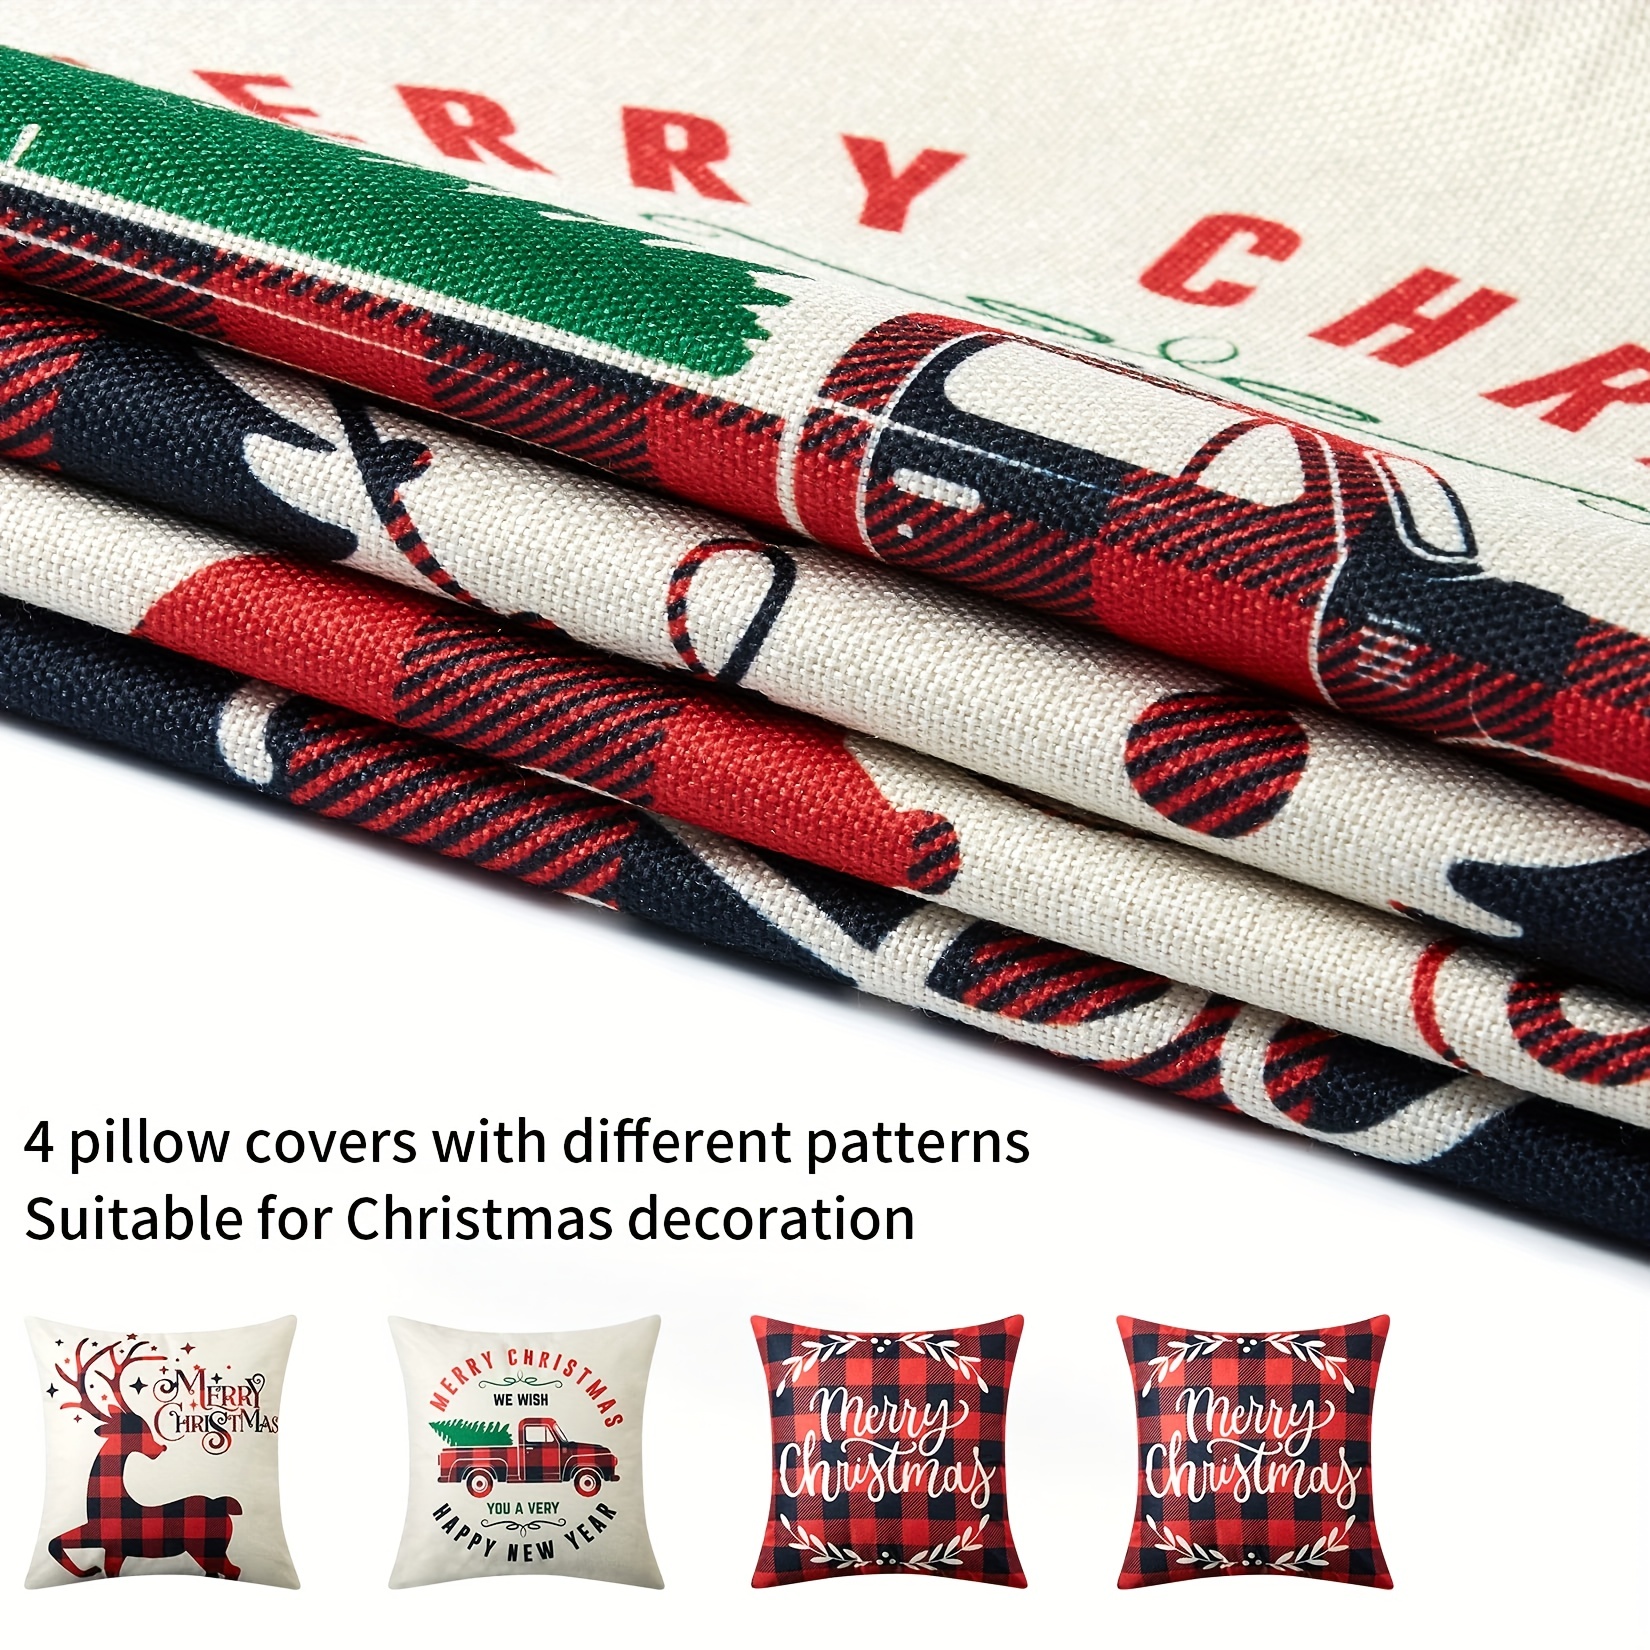 1pc Christmas Theme Sled & Santa Claus Slogan Cushion Cover, Modern Simple  Faux Linen Material With Hidden Zipper, Single Printed Side, Pillow Insert  Not Included, Suitable For Christmas Party Living Room Bedroom